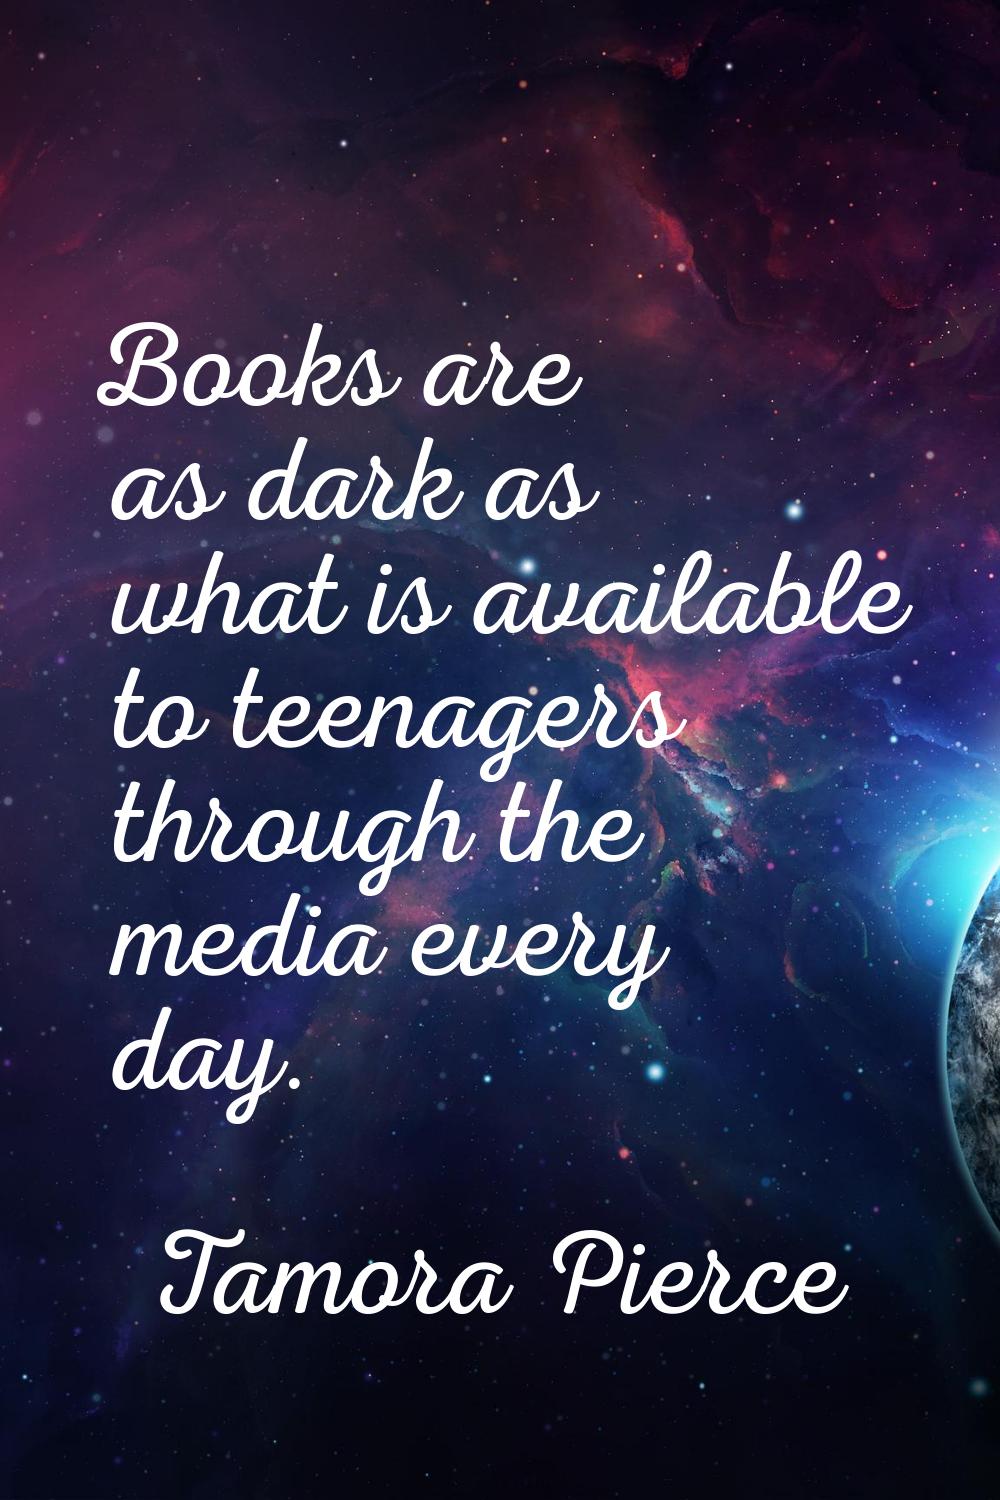 Books are as dark as what is available to teenagers through the media every day.